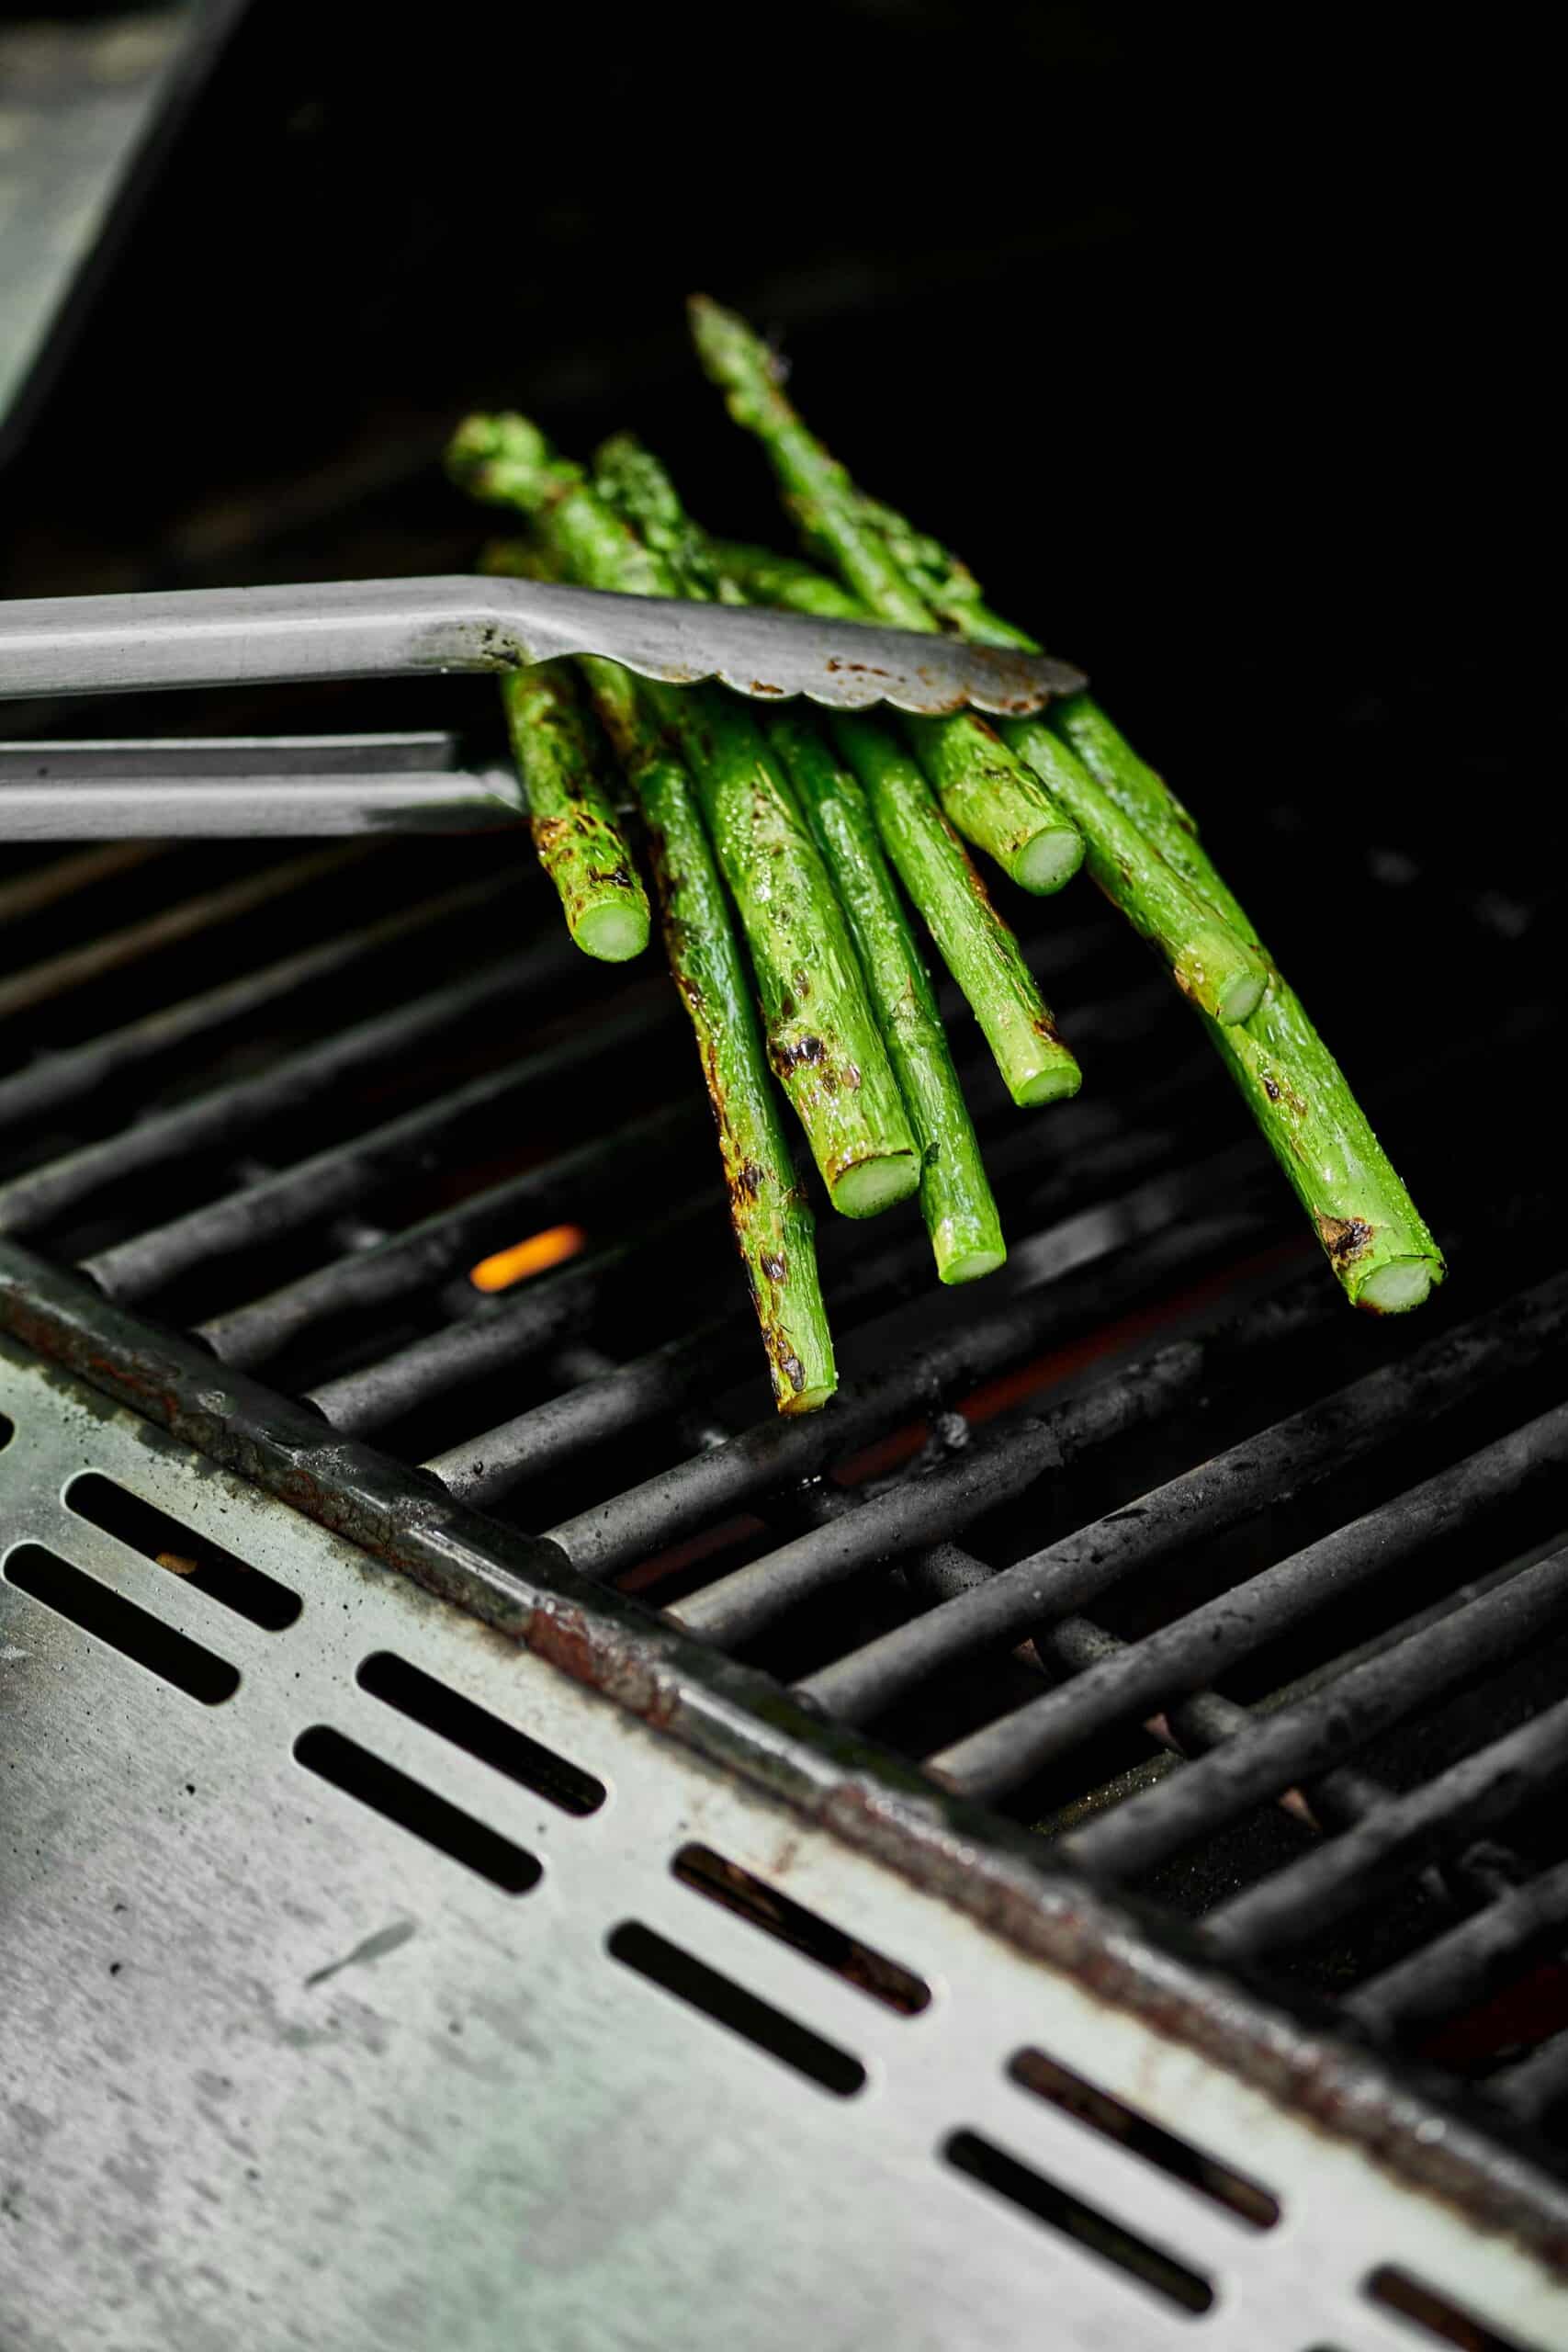 Tongs grabbing asparagus from a grill.